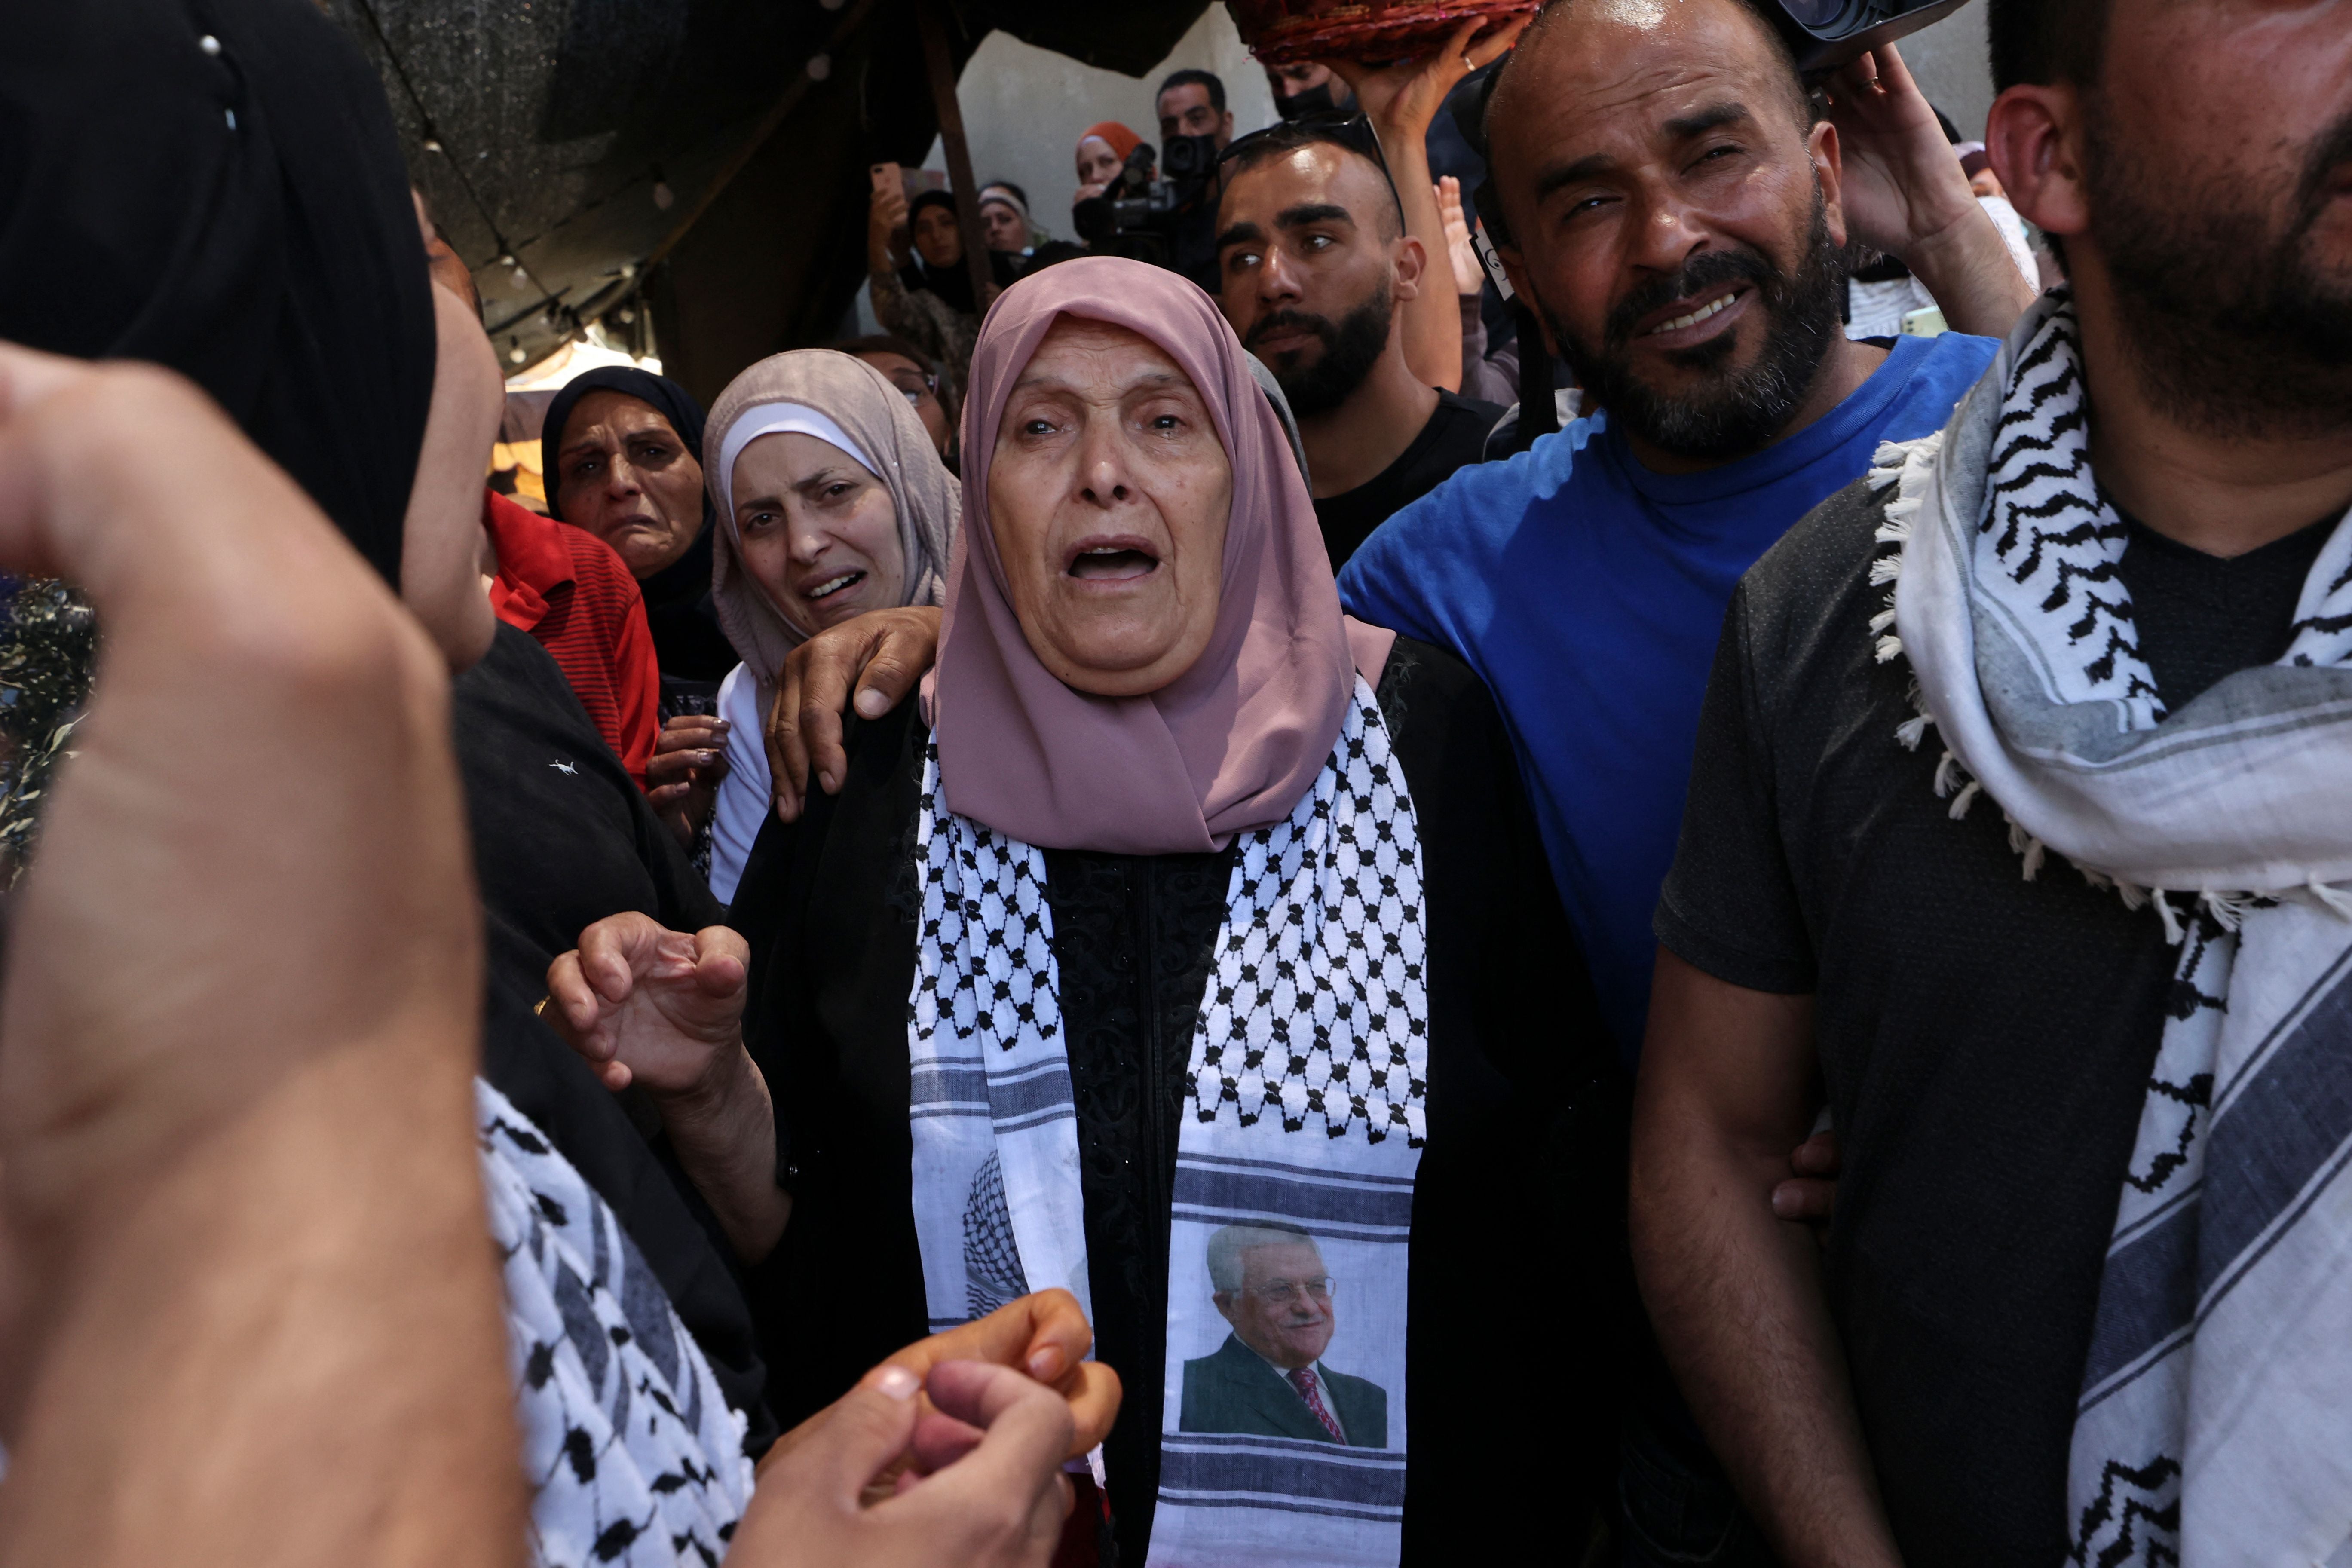 Relatives of Palestinian Birzeit University student Fadi Wahha, who was reportedly shot by Israeli security forces during a protest, mourn at his burial in Birzeit on 3 June